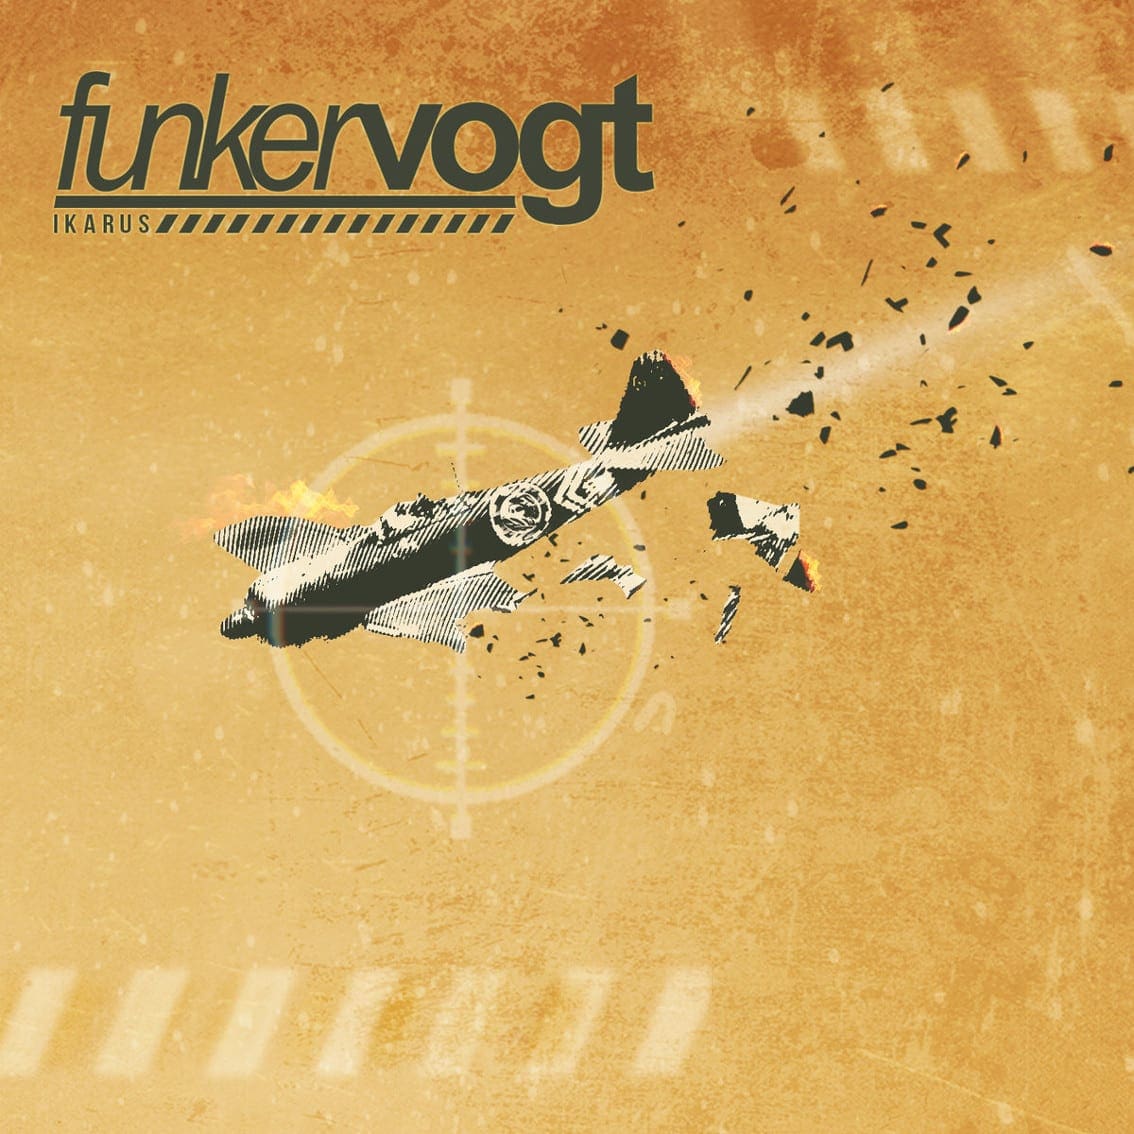 Funker Vogt launch 'Ikarus' video to announce new EP - watch it on Side-Line